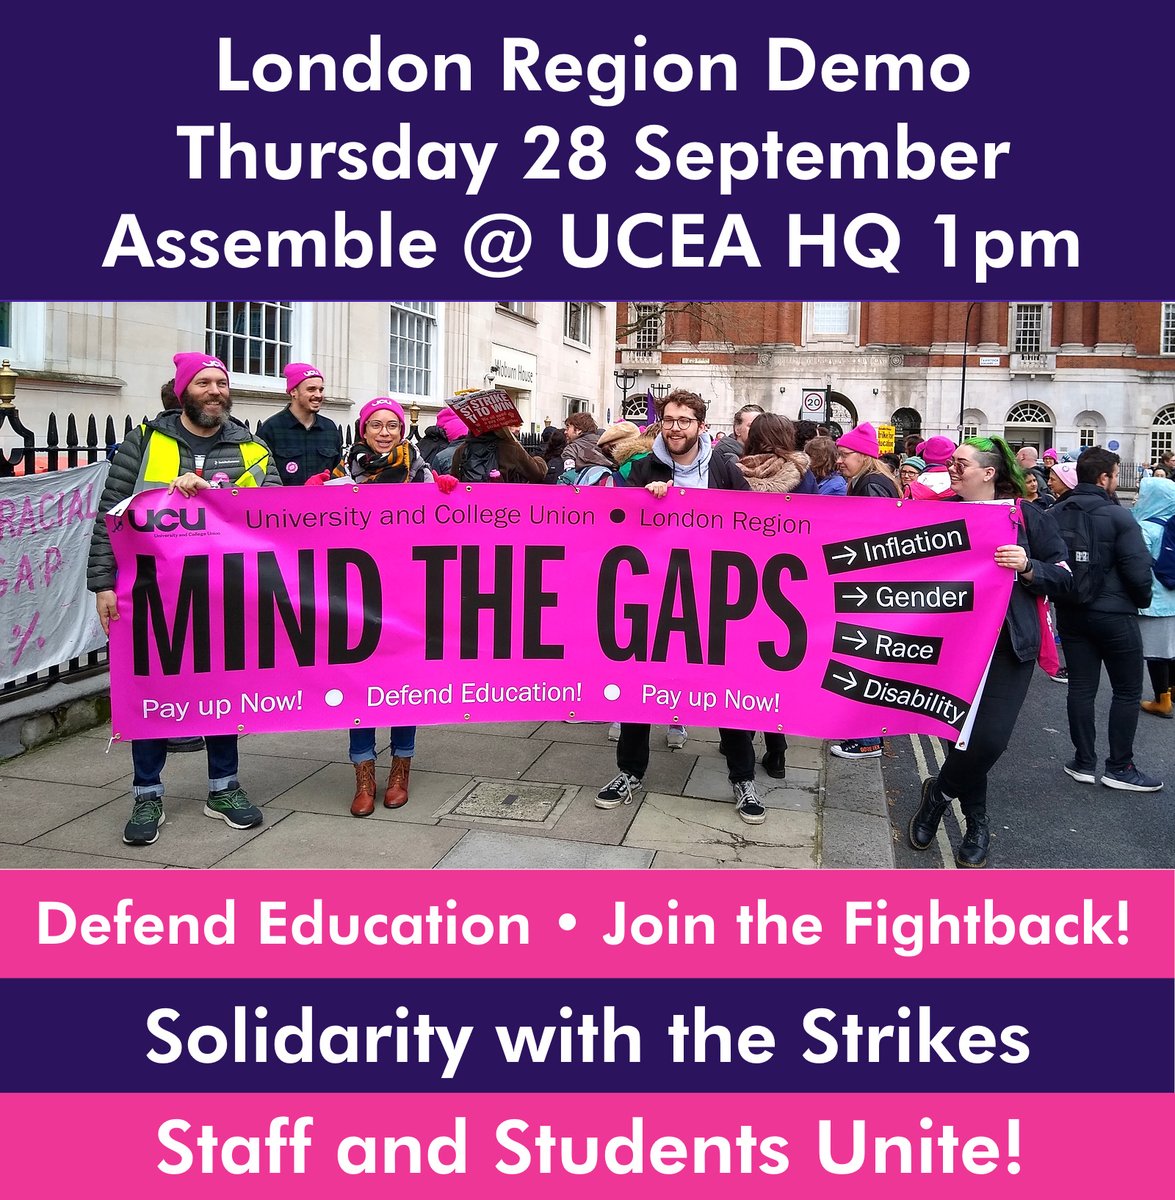 𝗟𝗼𝗻𝗱𝗼𝗻 𝗥𝗲𝗴𝗶𝗼𝗻 𝗗𝗲𝗺𝗼 Thursday 28 September Defend Education • Join the Fightback! Solidarity with the Strikes • Staff and Students Unite! 🏃🏃‍♂️🏃‍♀️🏃‍♂️🏃 Assemble: 1pm, UCEA HQ, Tav. Square March around Bloomsbury Post-demo meeting: 3pm, UCL uculondonregion.wordpress.com/2023/09/23/ucu…